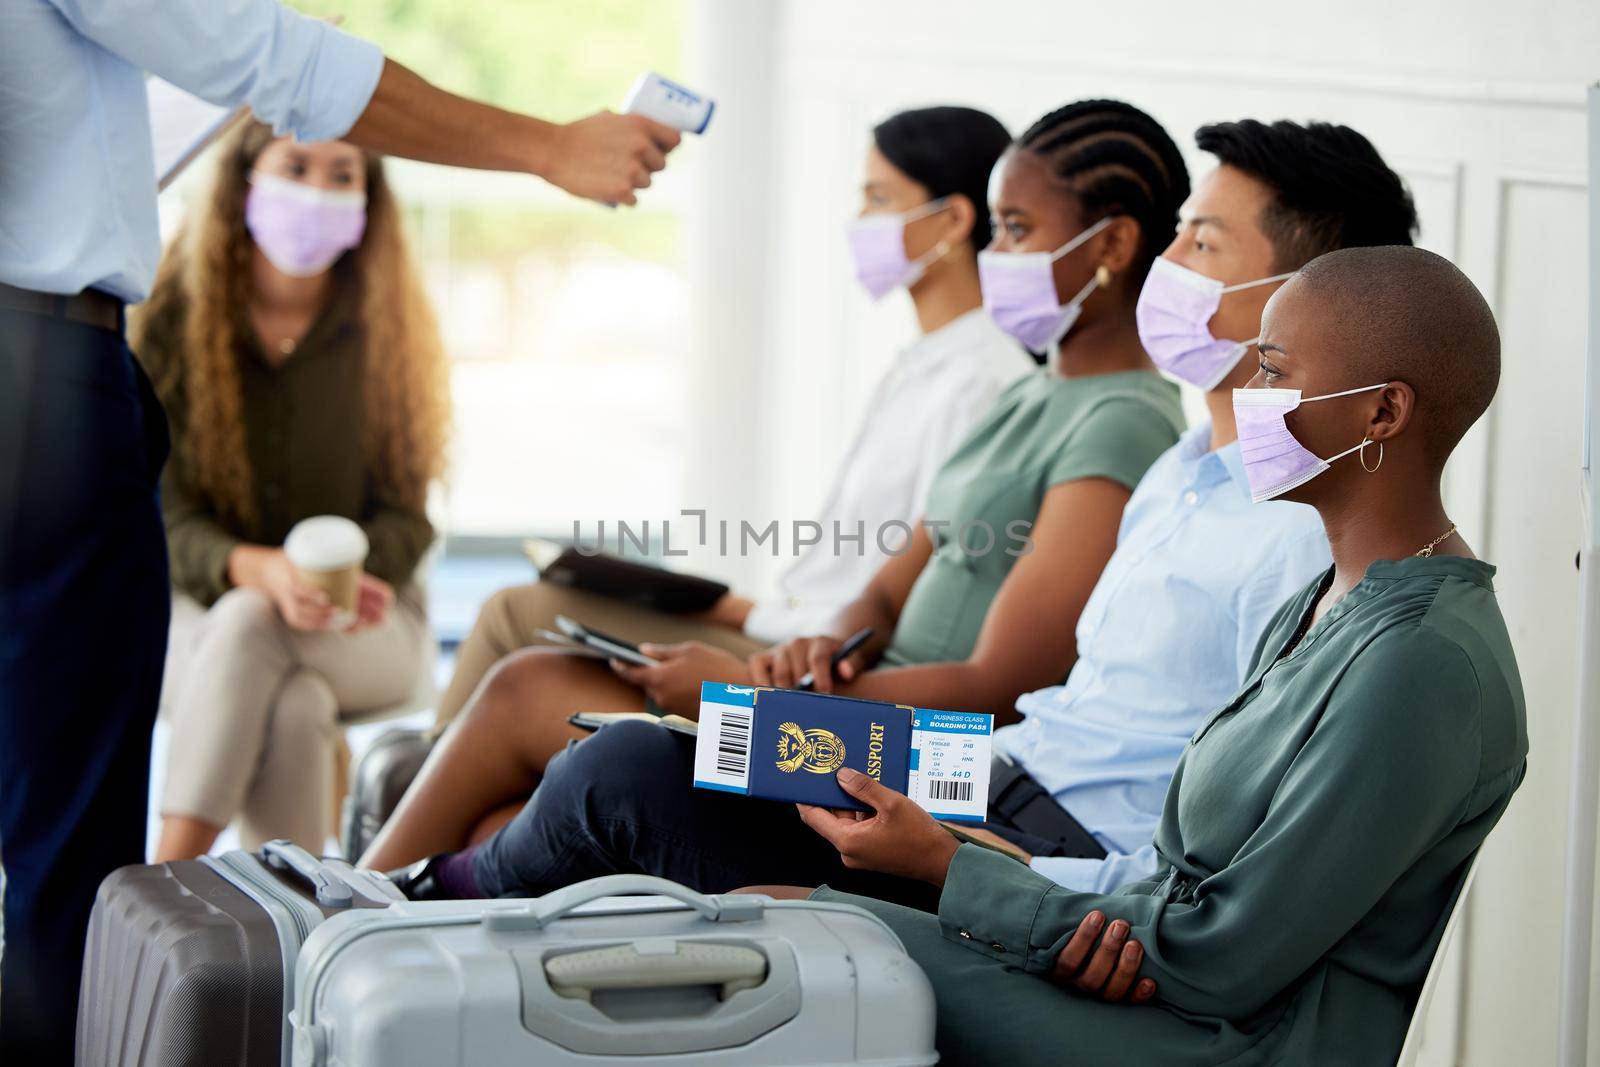 Covid, travel and airport with security scanning a woman with an infrared thermometer for temperature. Immigration, restrictions and passport with a female passenger getting ready to board a flight by YuriArcurs